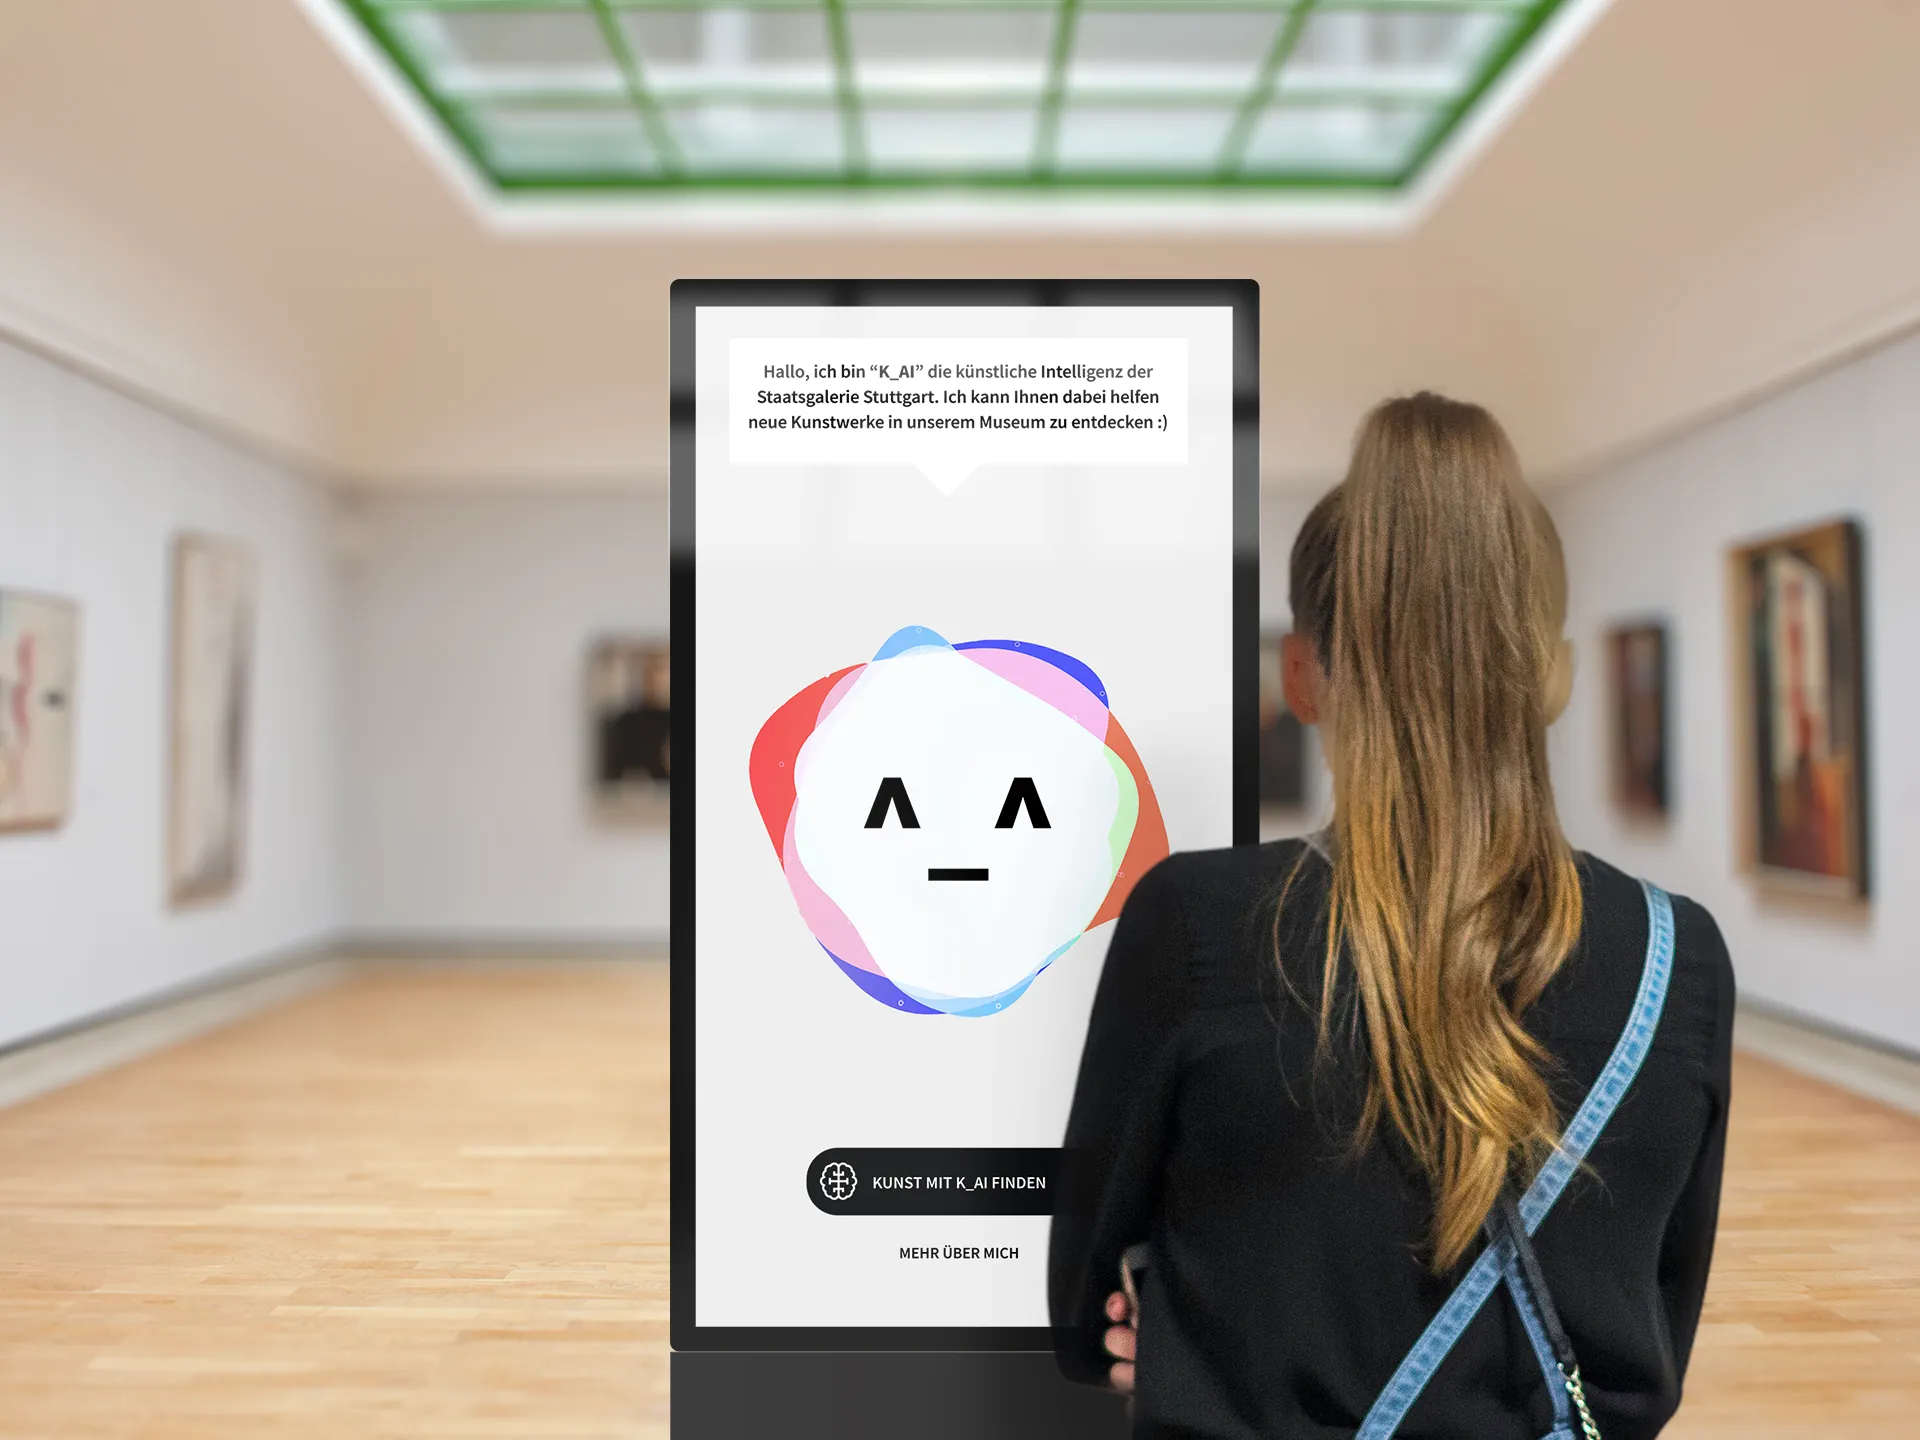 Find Your Favorite Art with the Help of AI